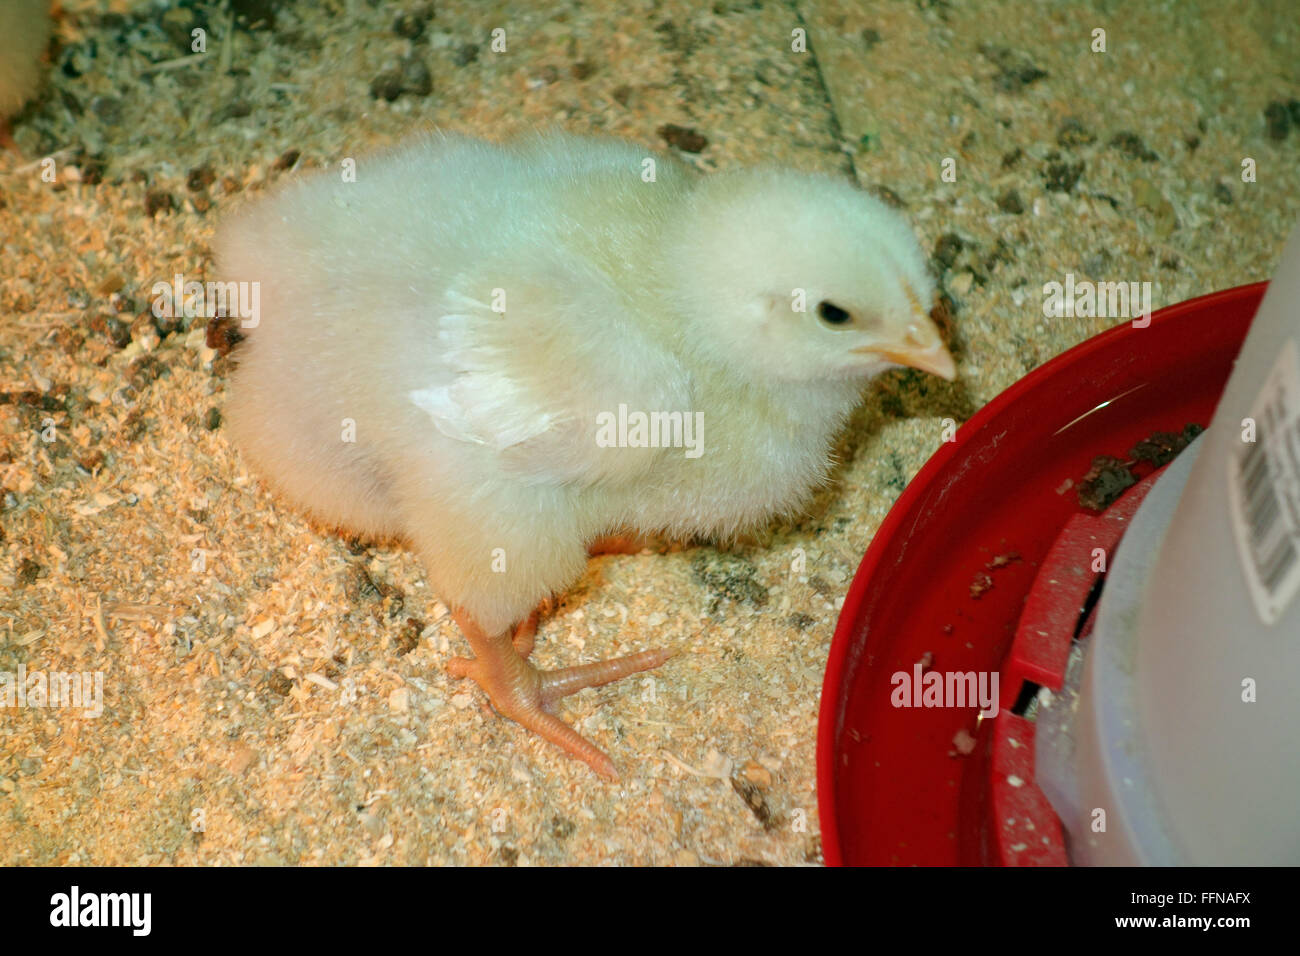 A baby hatchling chicken chick with fluffy white feathers and down Stock Photo